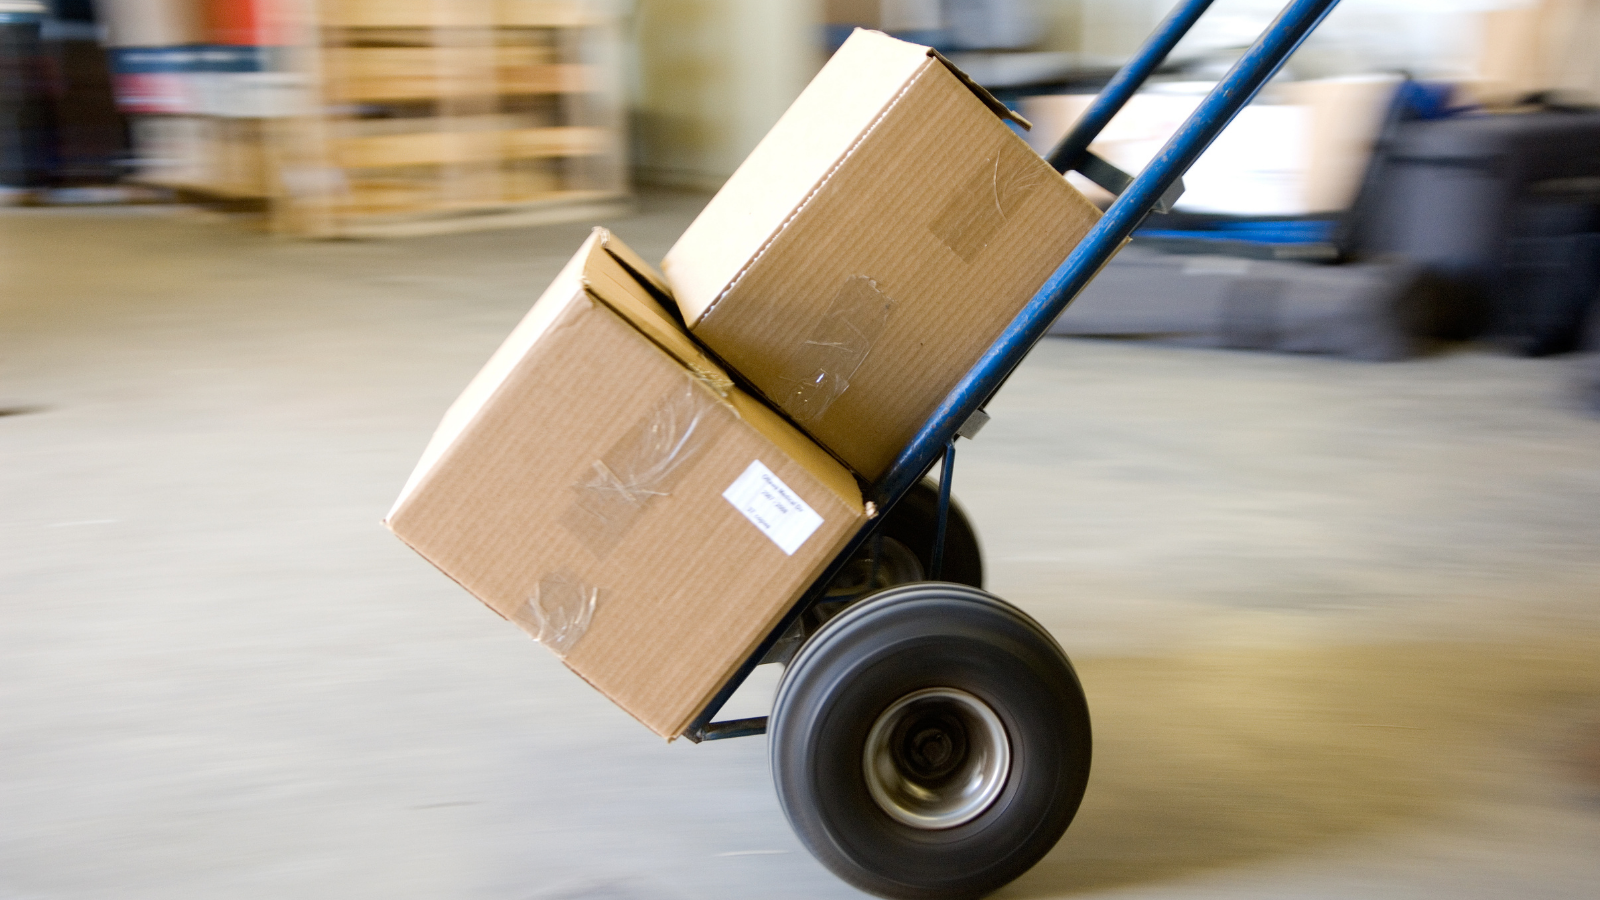 Image of a dolly transporting two moving boxes in an empty garage space.